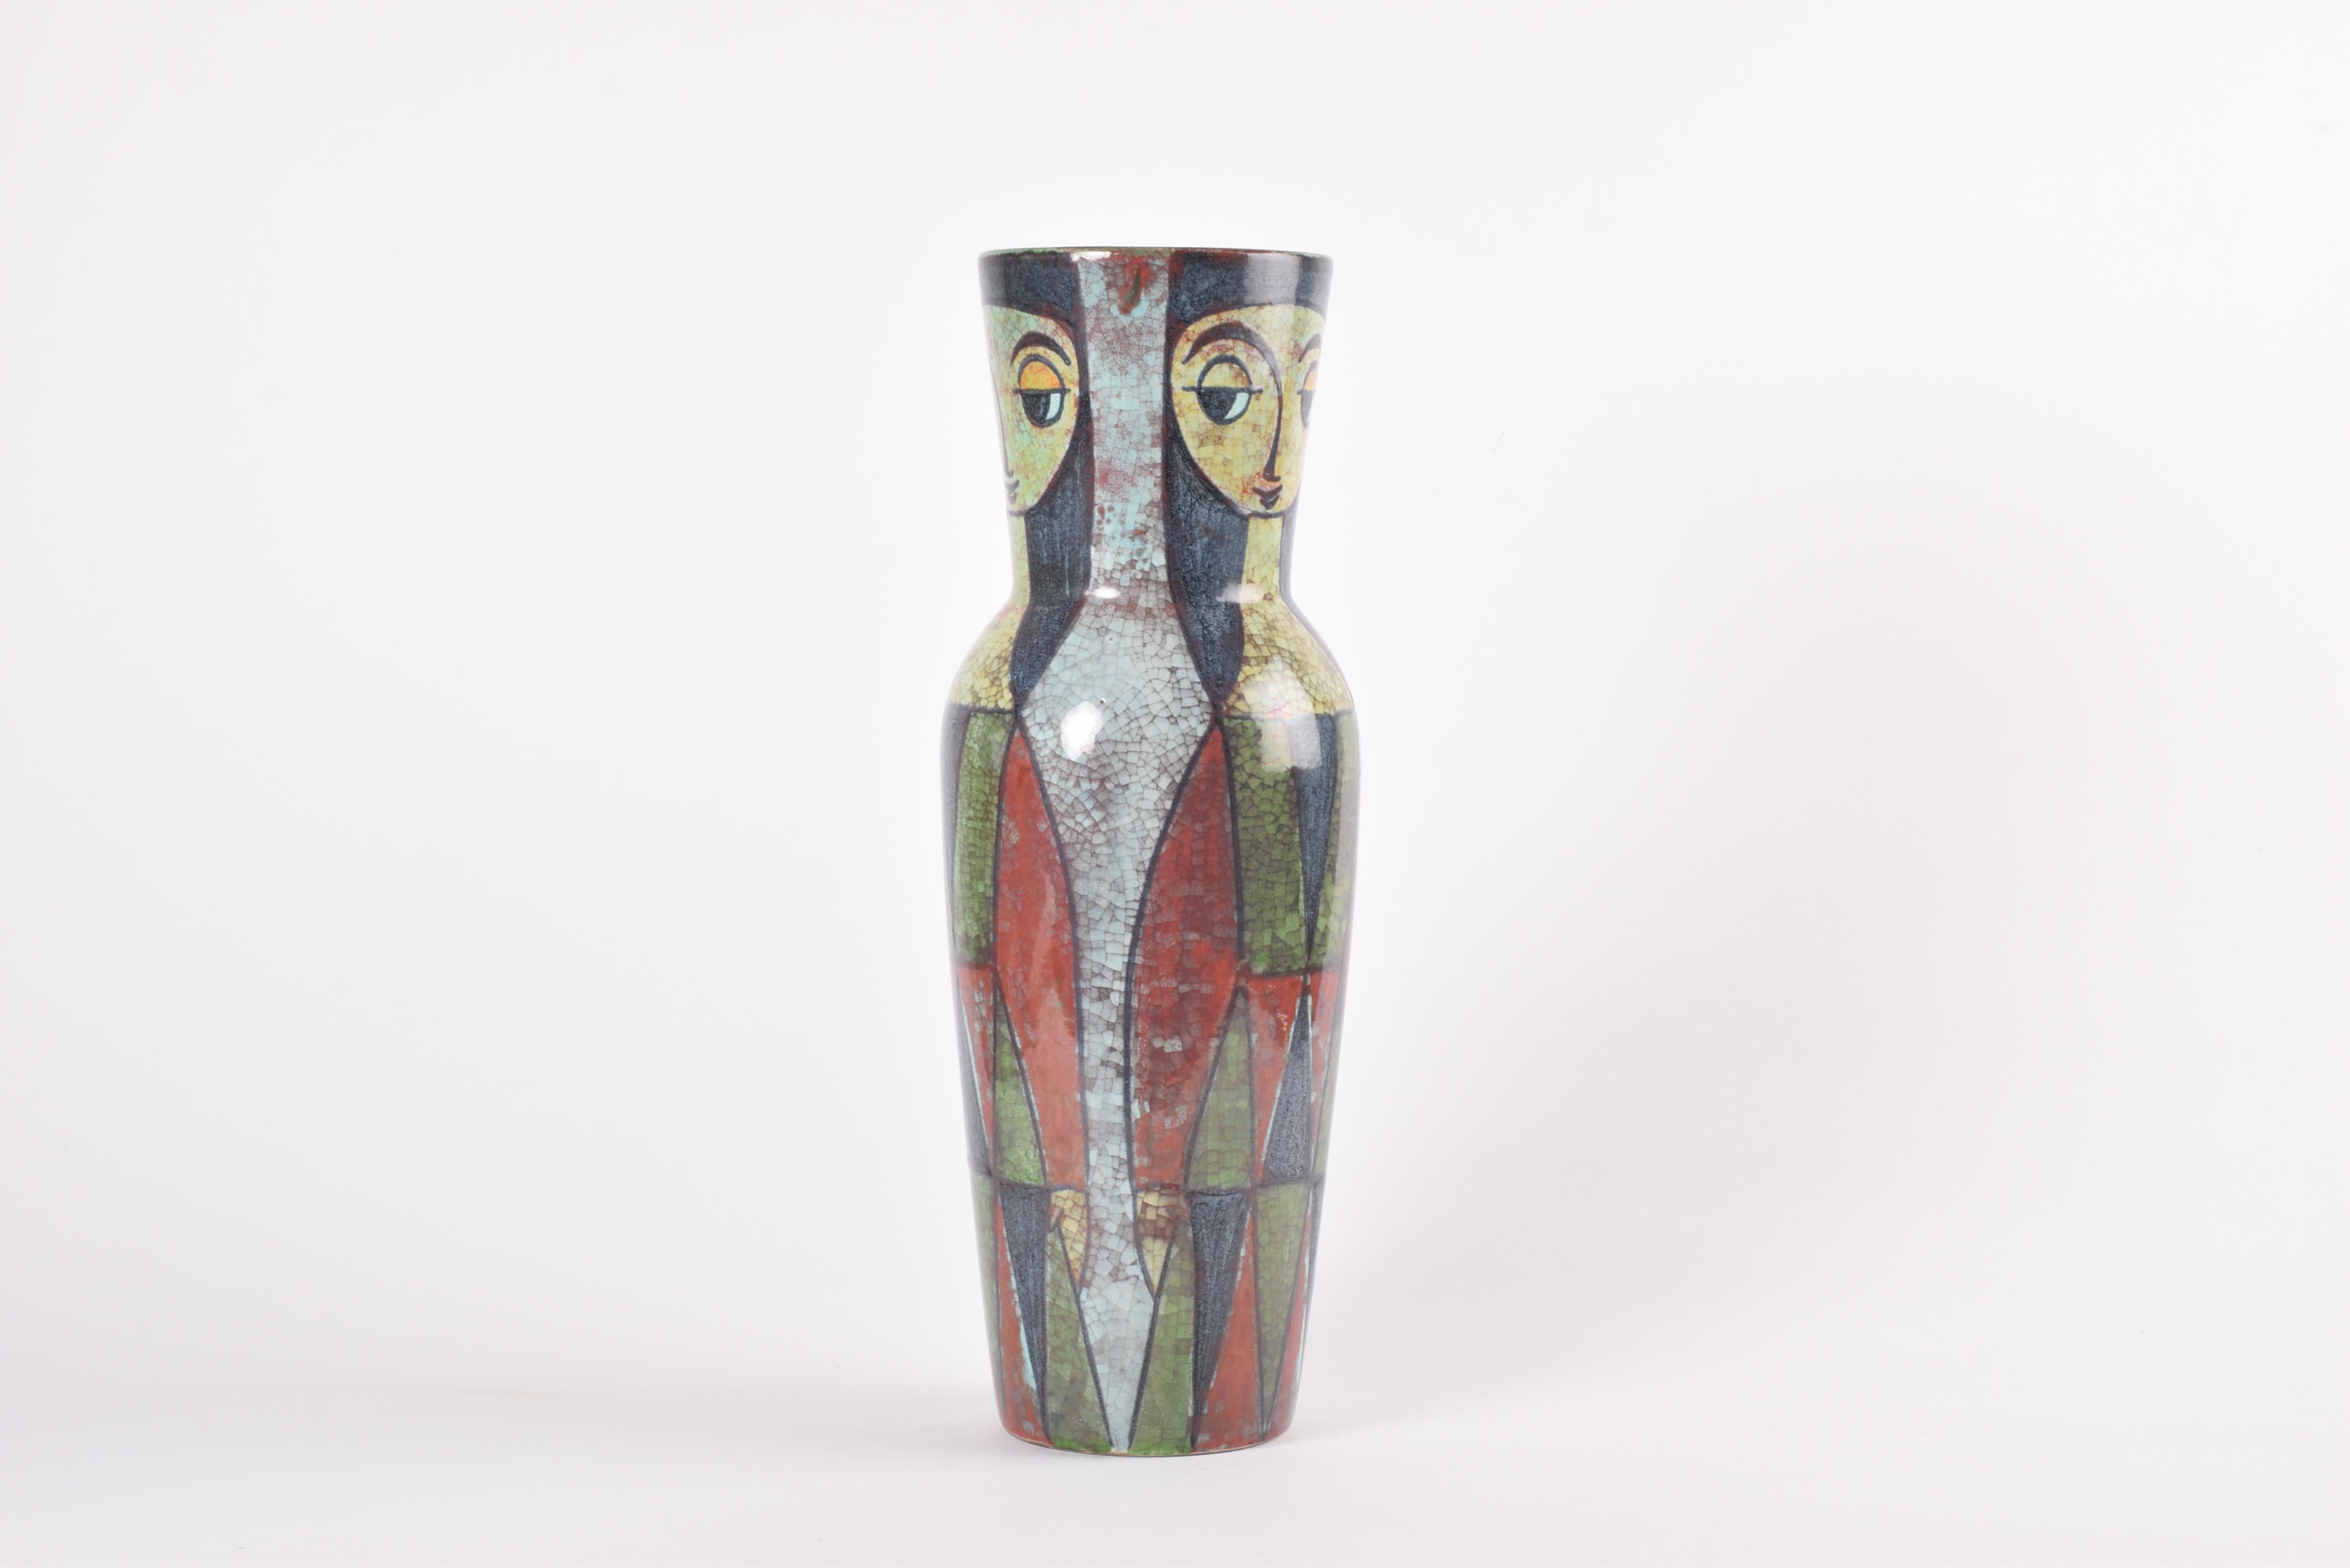 Glazed Tall Vase by Marianne Starck for MA&S Persia Glaze Colorful Decor, Danish 1960s For Sale